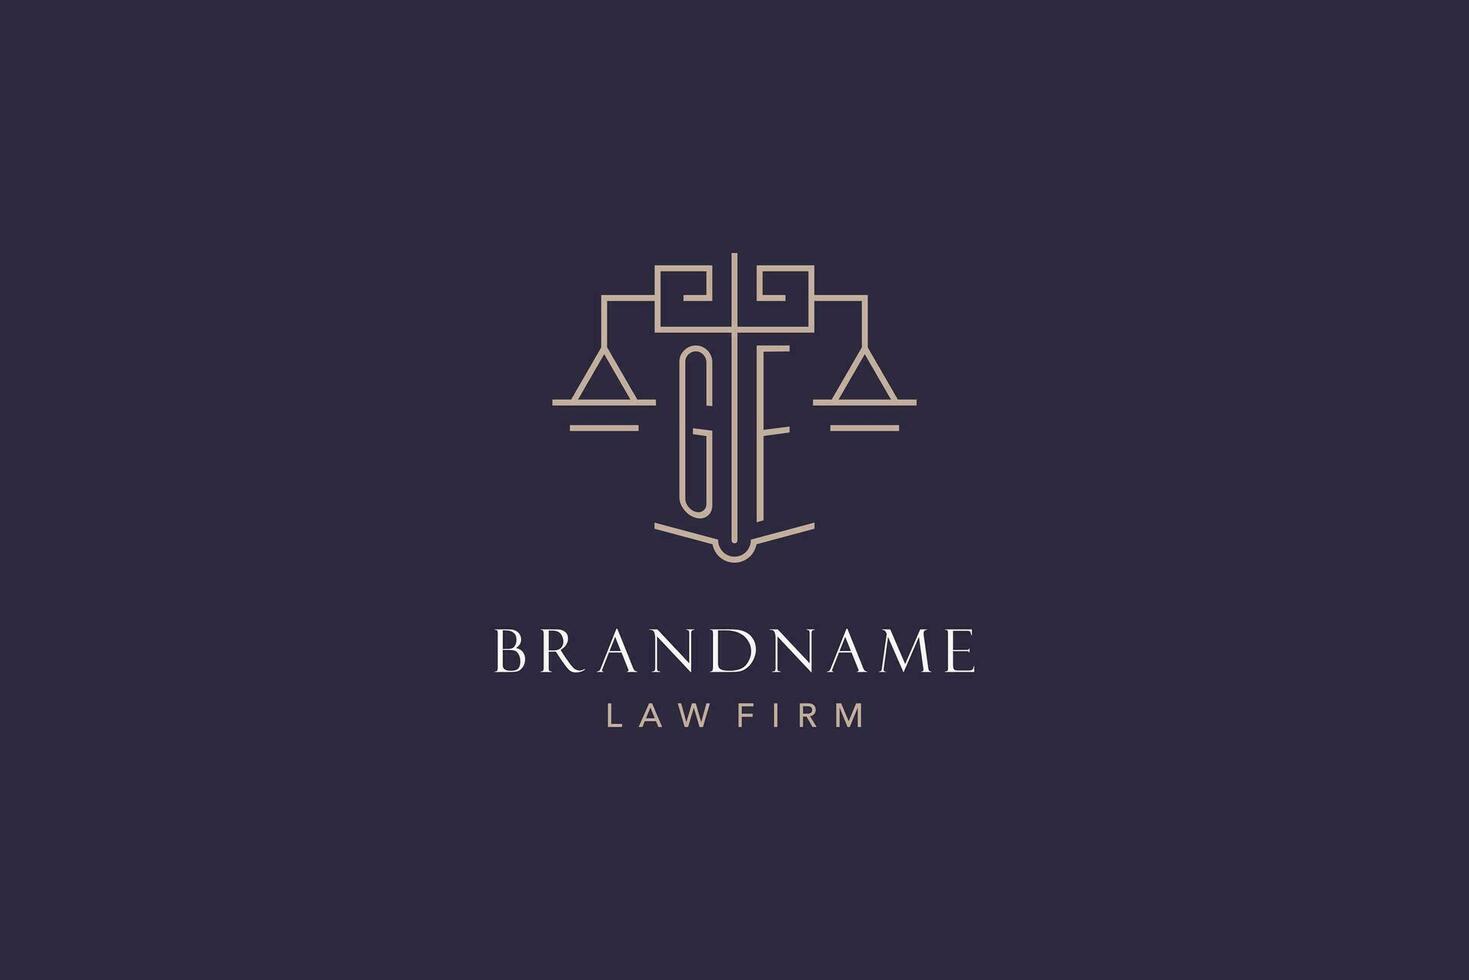 Initial letter GF logo with scale of justice logo design, luxury legal logo geometric style vector